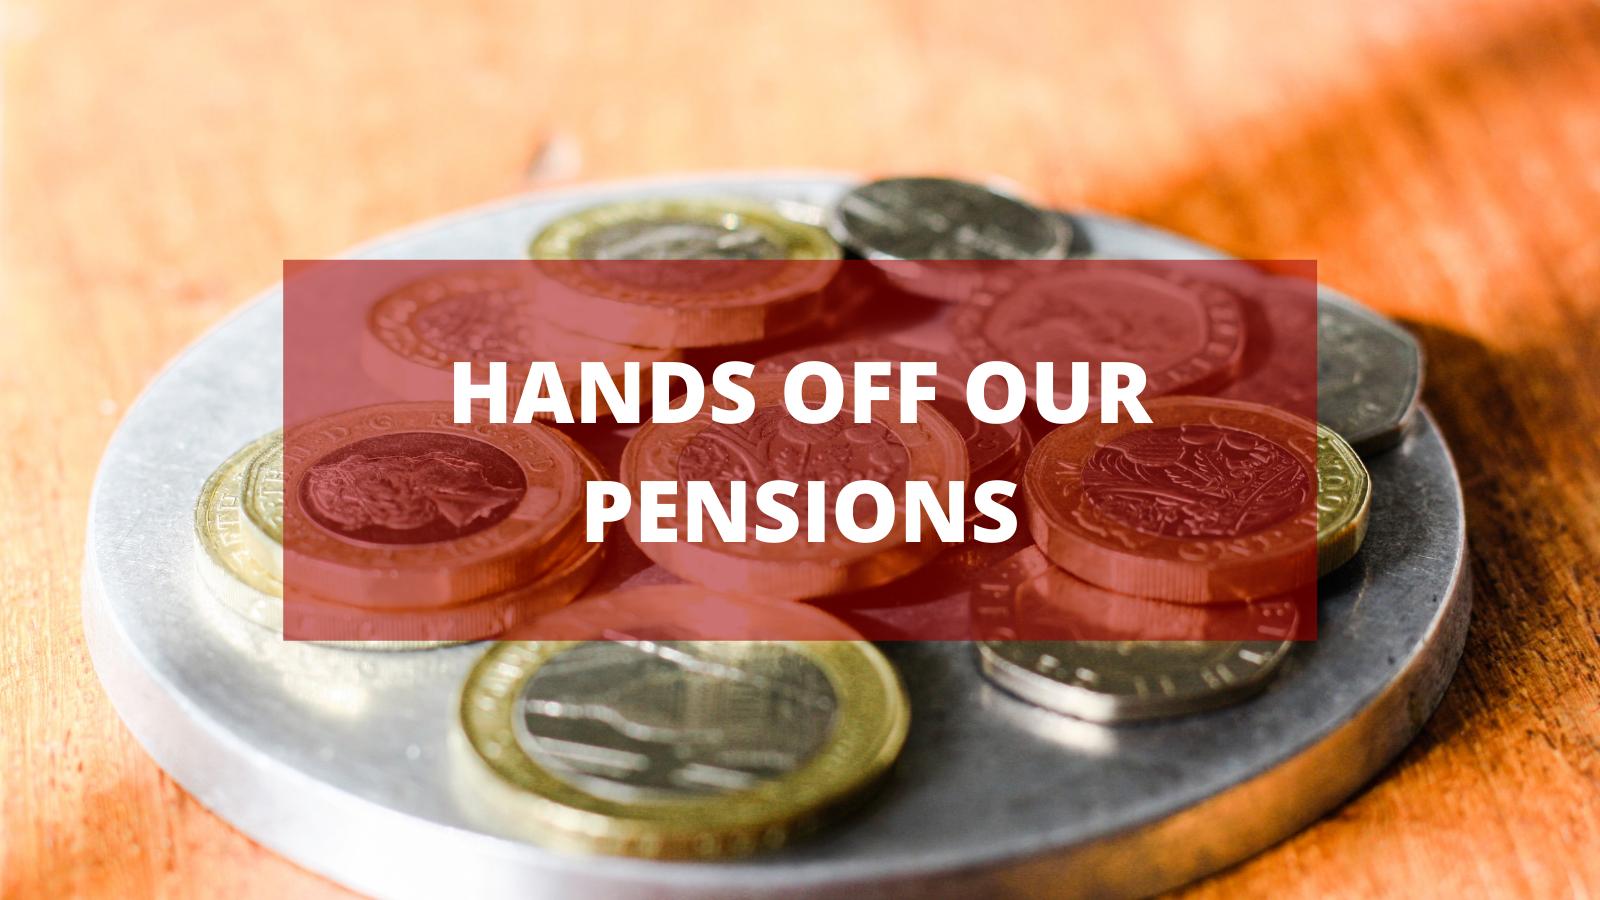 Hands off our pensions